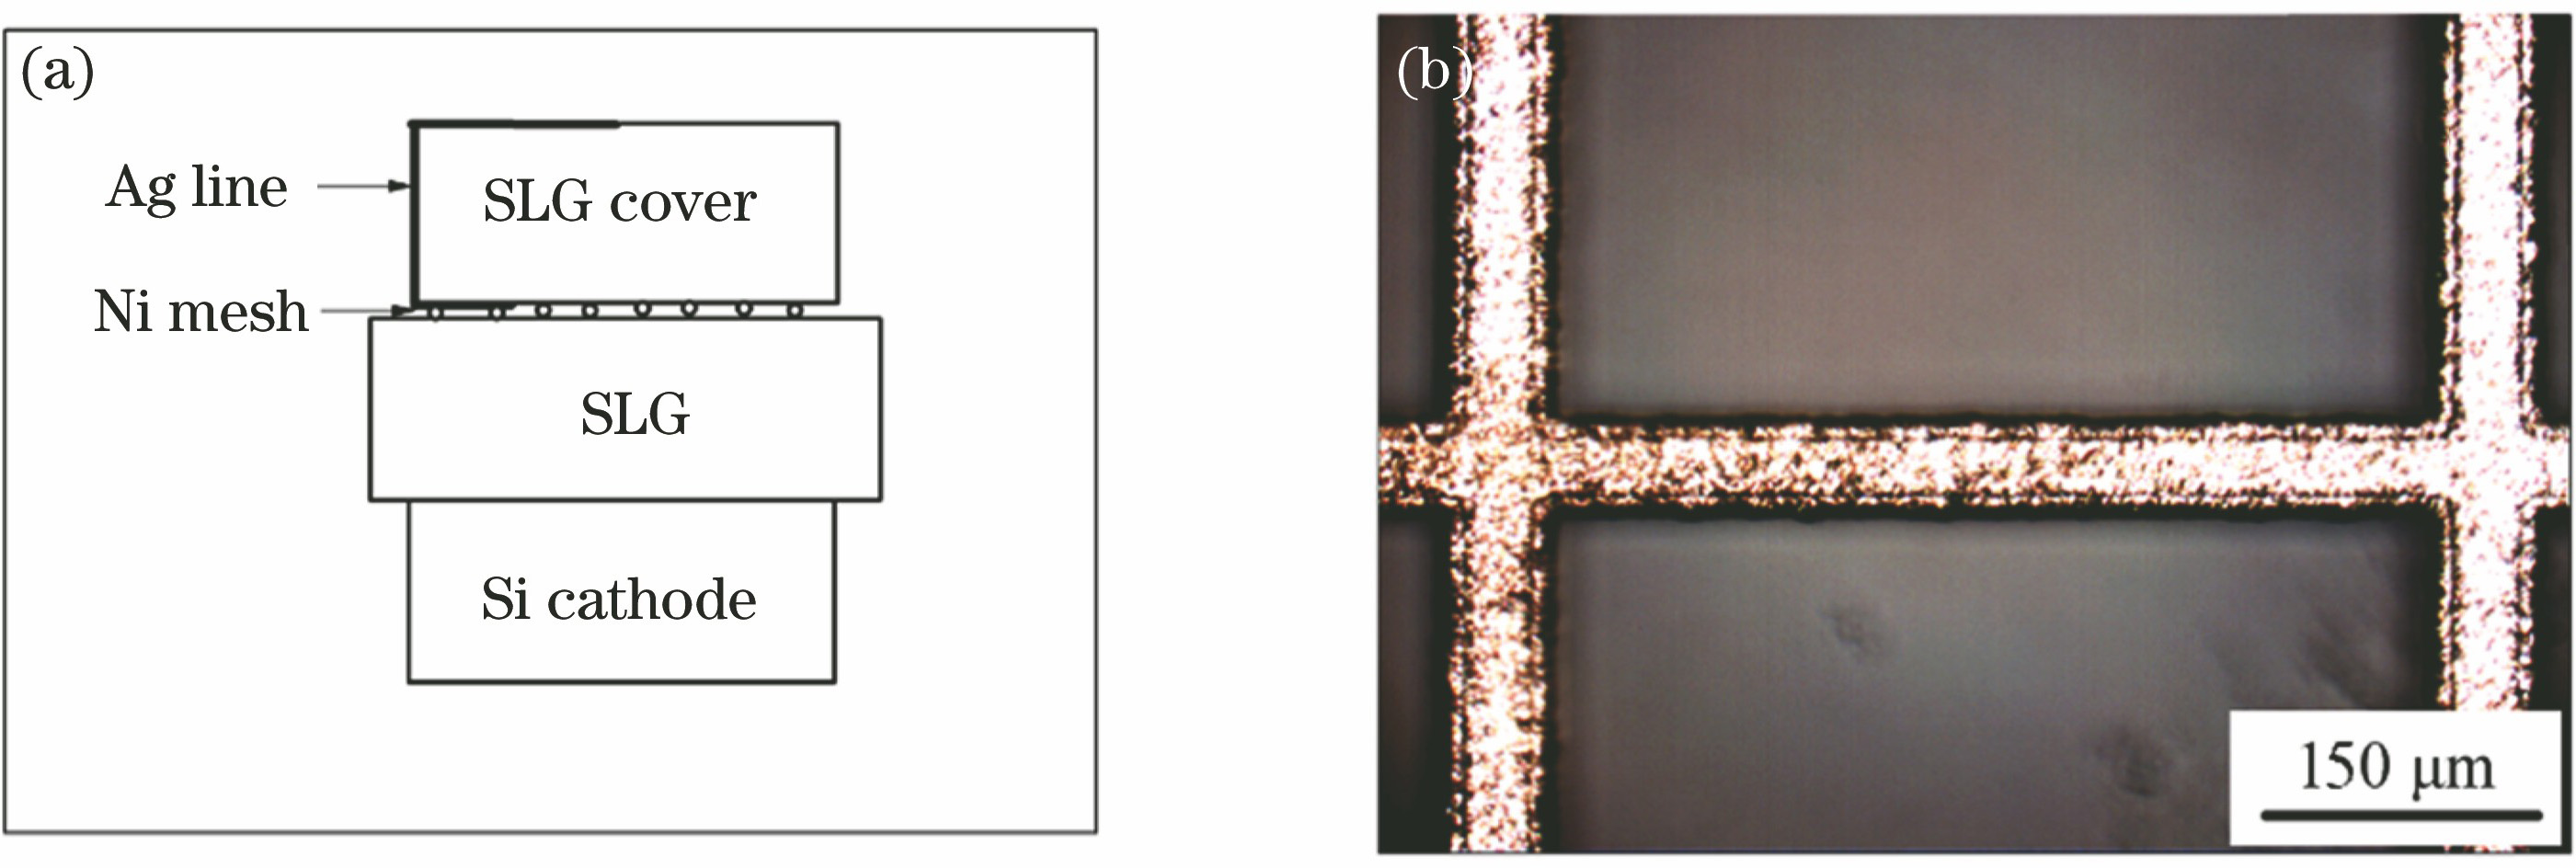 Schematic of microthermal poling sandwich and image of Ni mesh. (a) Schematic; (b) image of Ni mesh